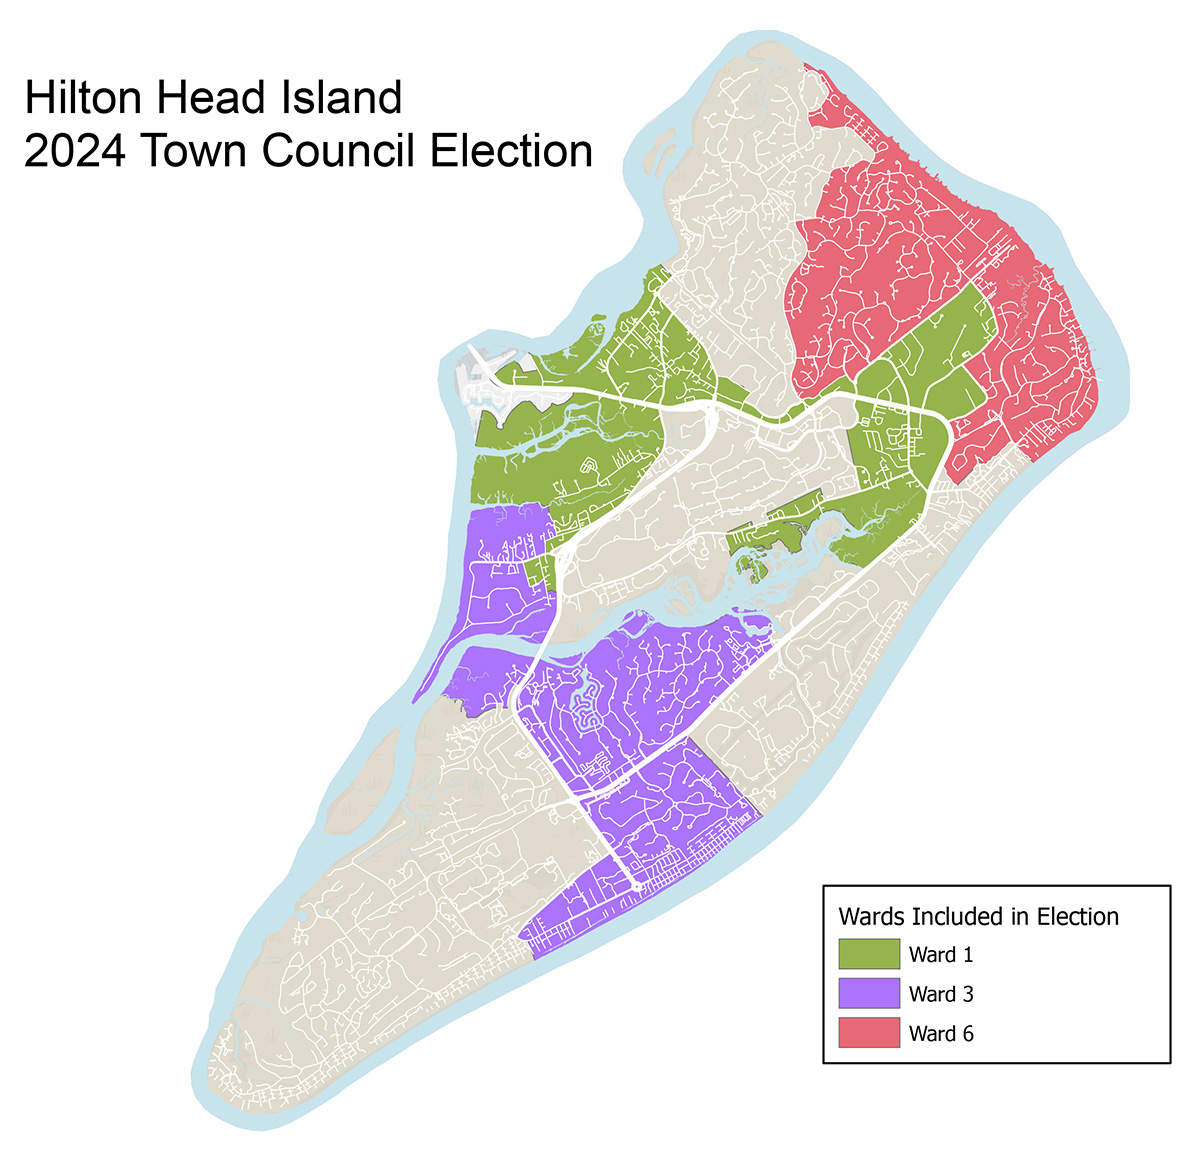 Map of Hilton Head ISland with Ward 1, 3 and 6 shaded